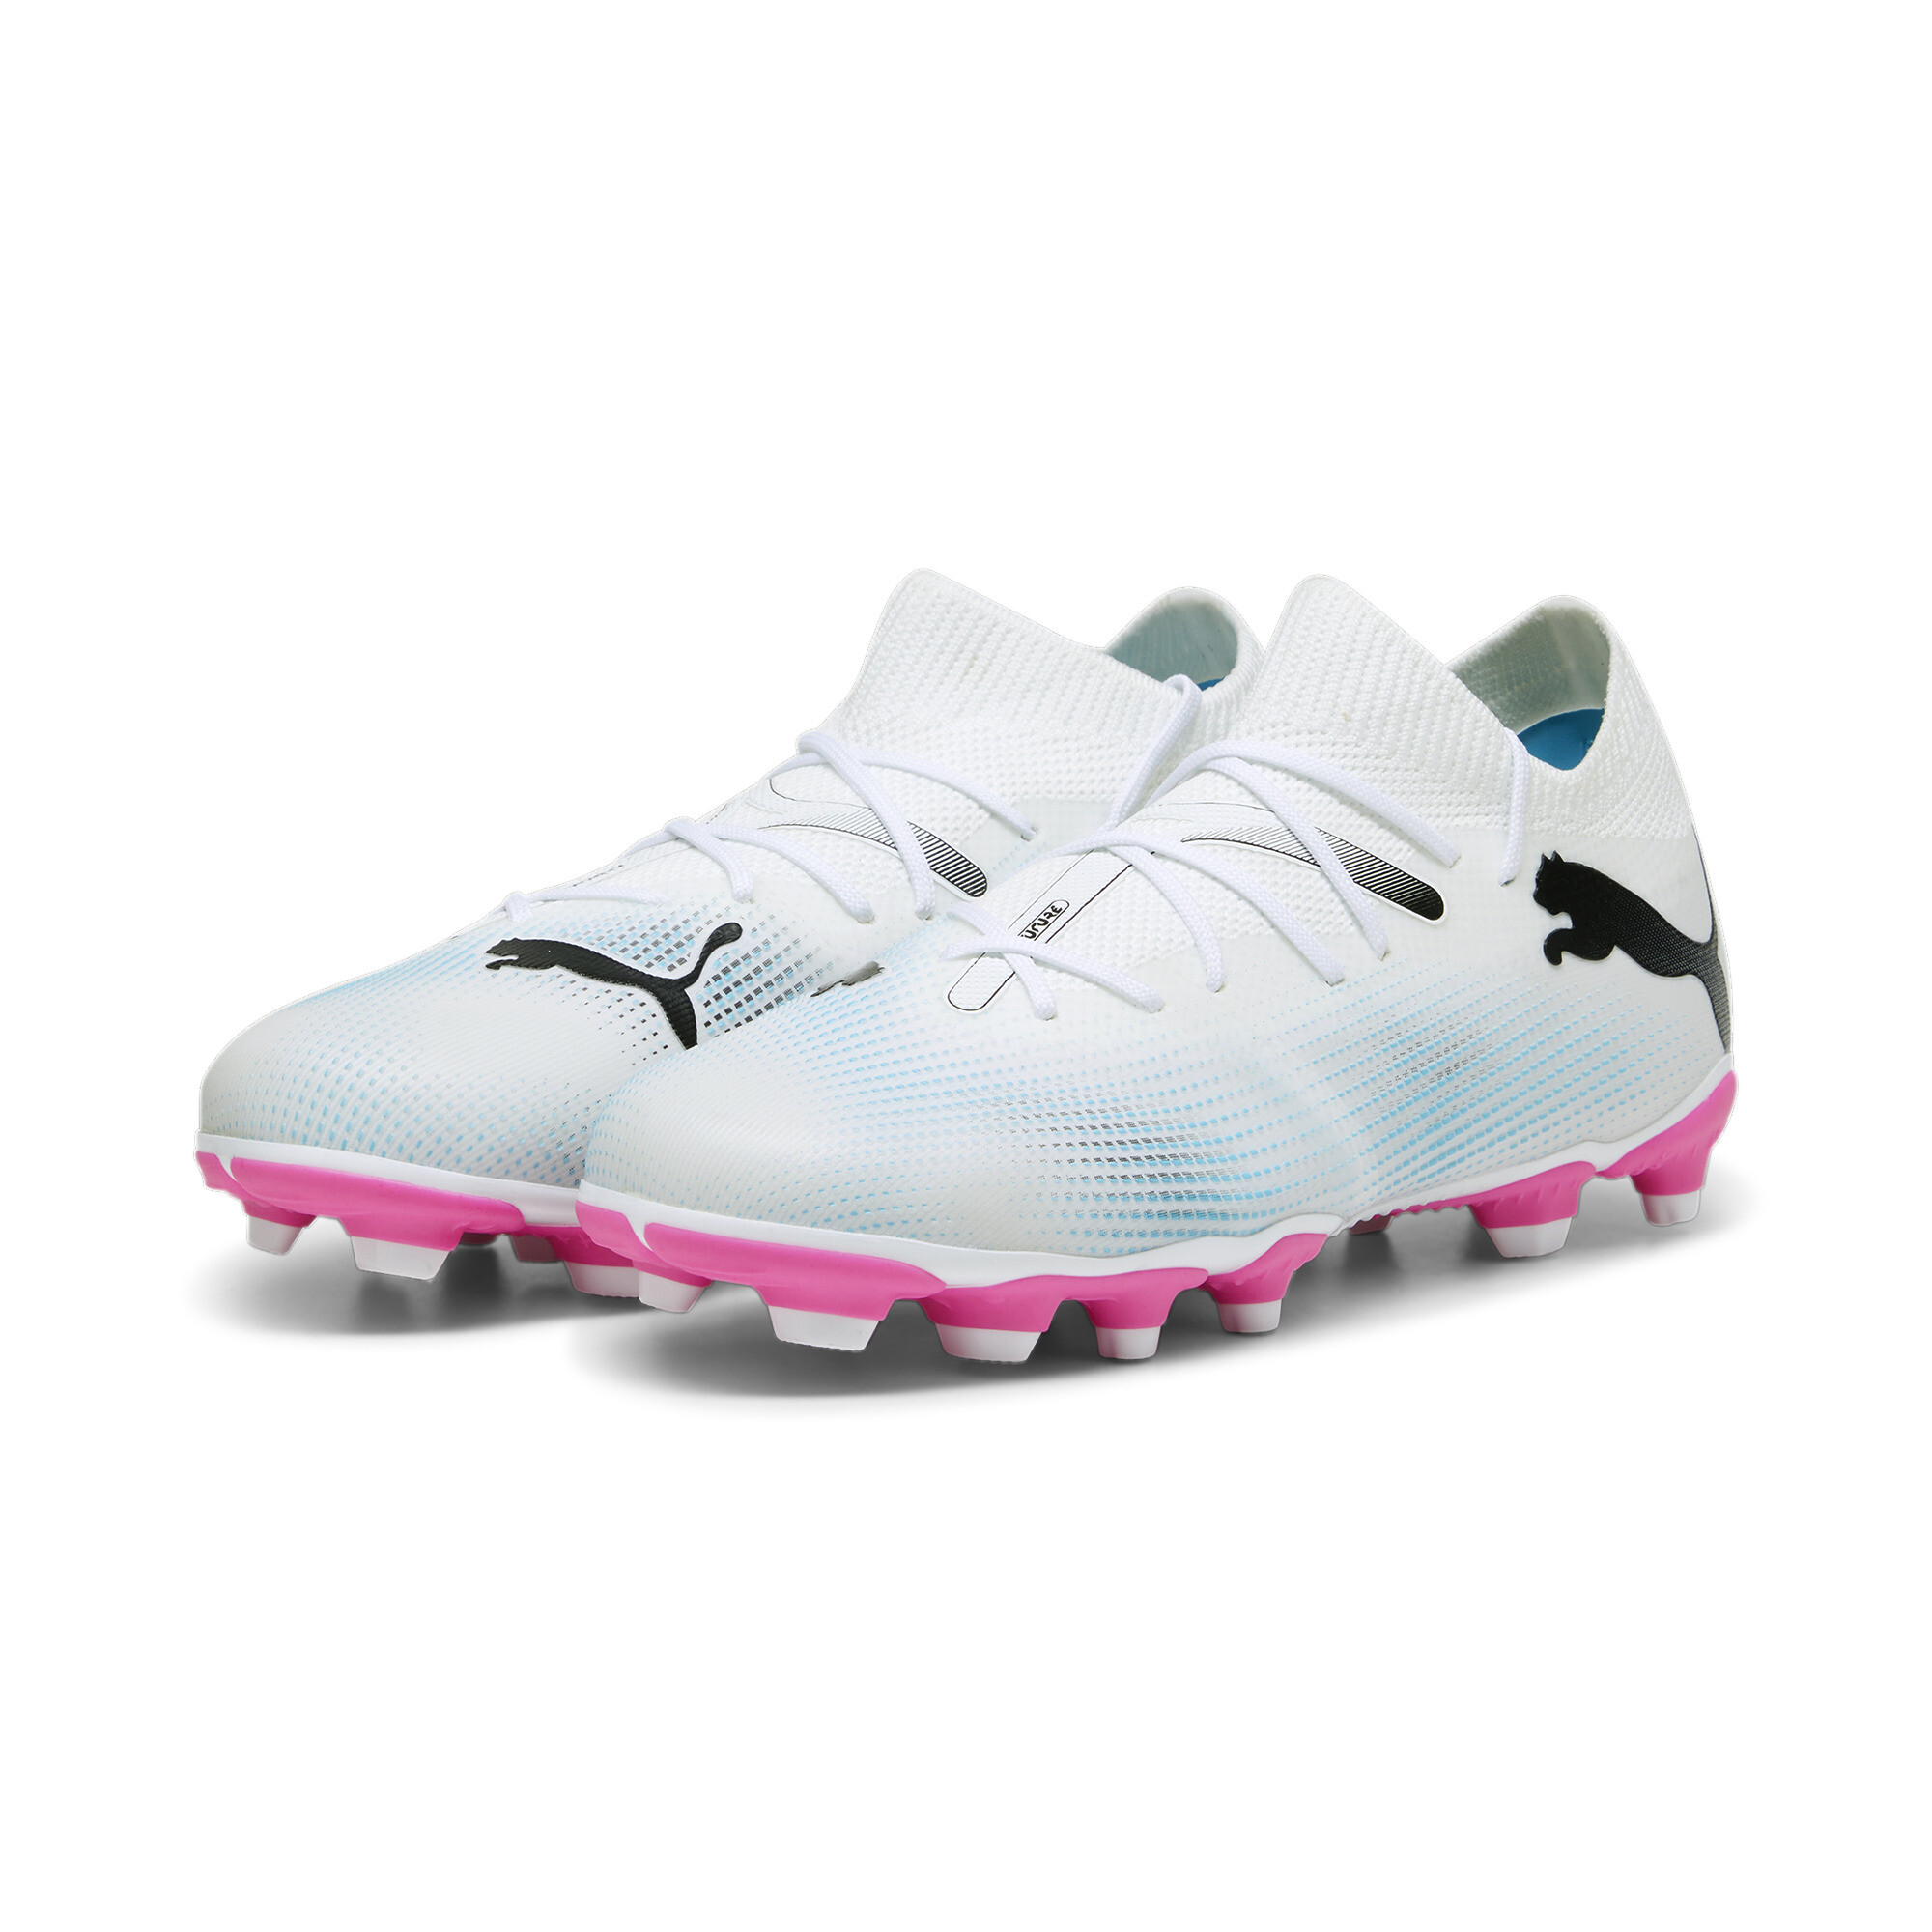 PUMA FUTURE 7 MATCH FG/AG Youth Football Boots In White/Pink, Size EU 29